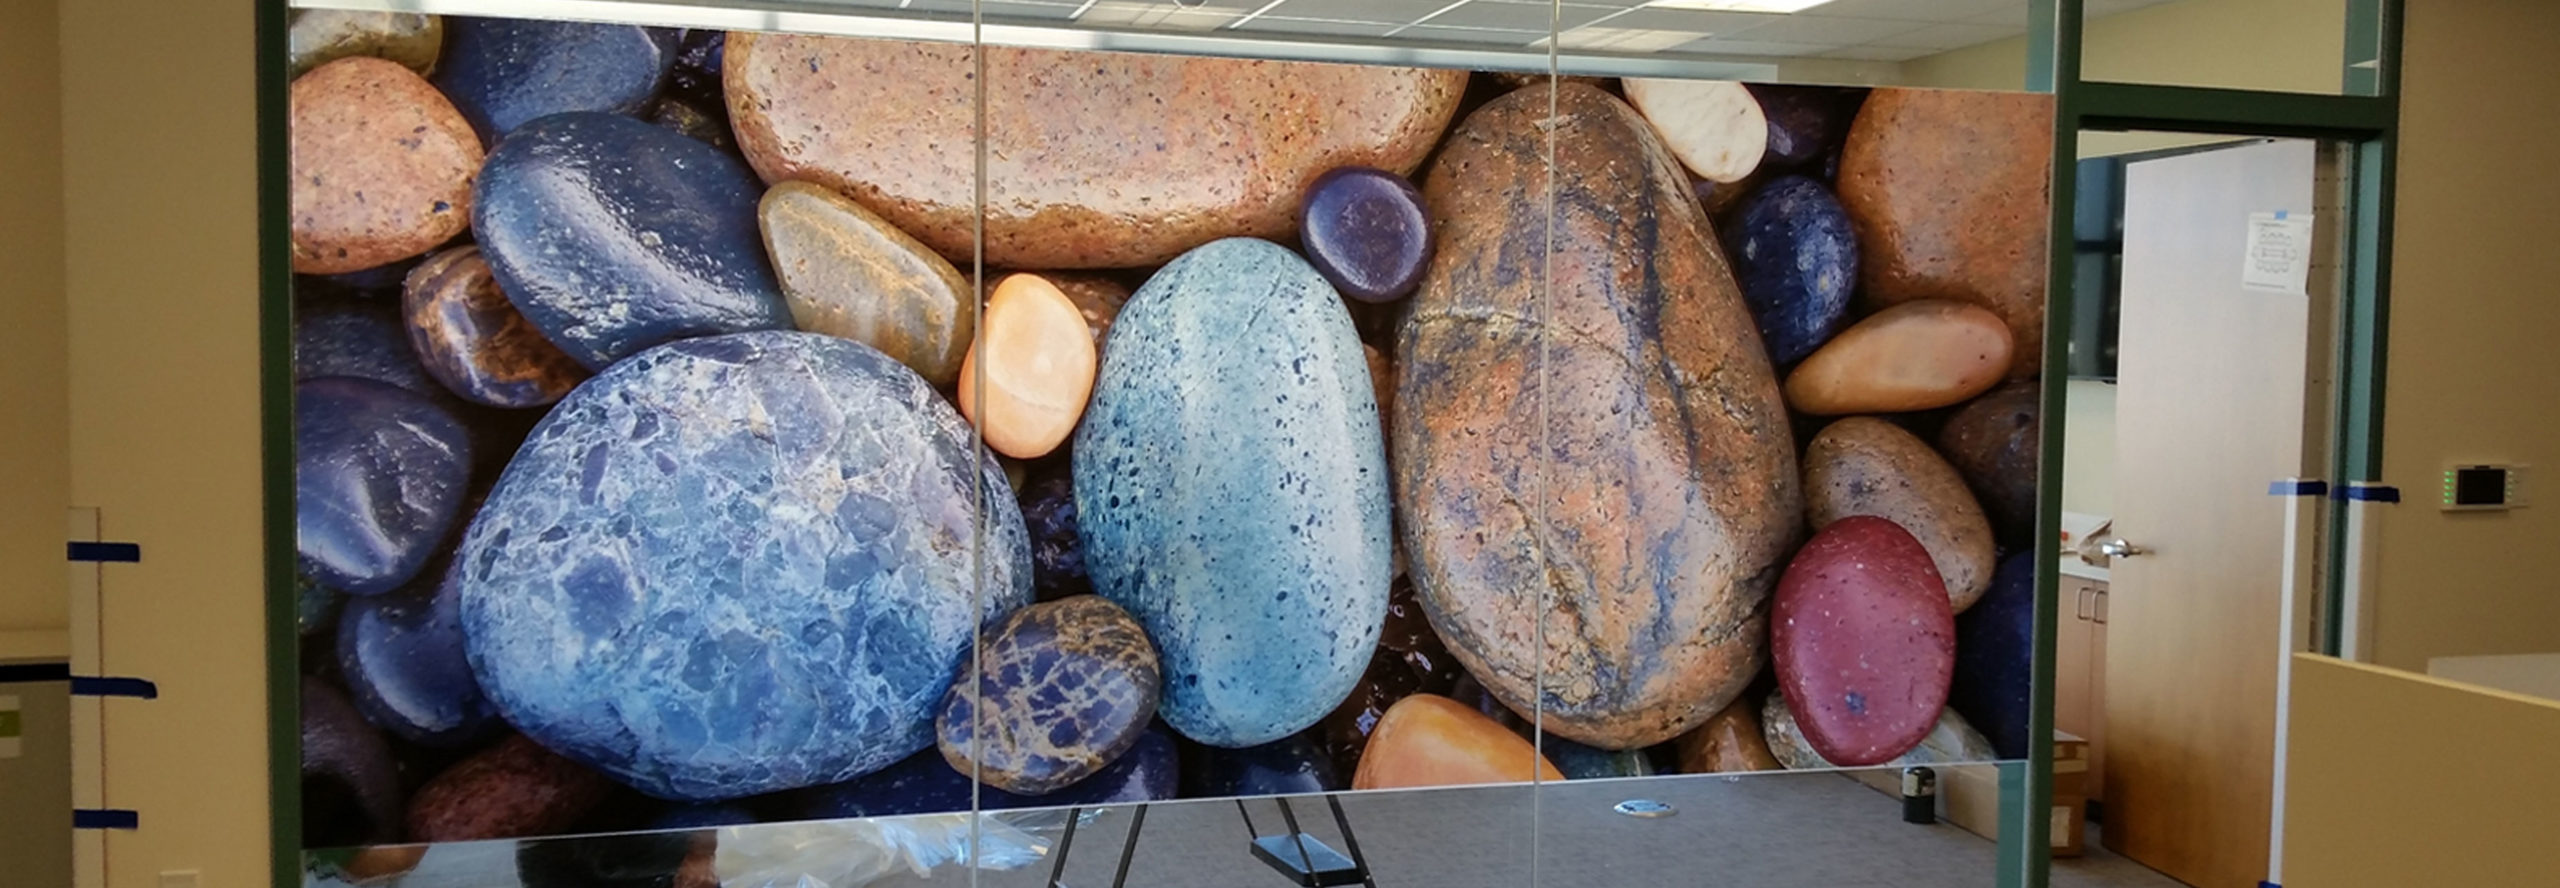 Colorful Translucent Window film featuring photo of wet river stones enlarged and used as privacy film on large interior office window.